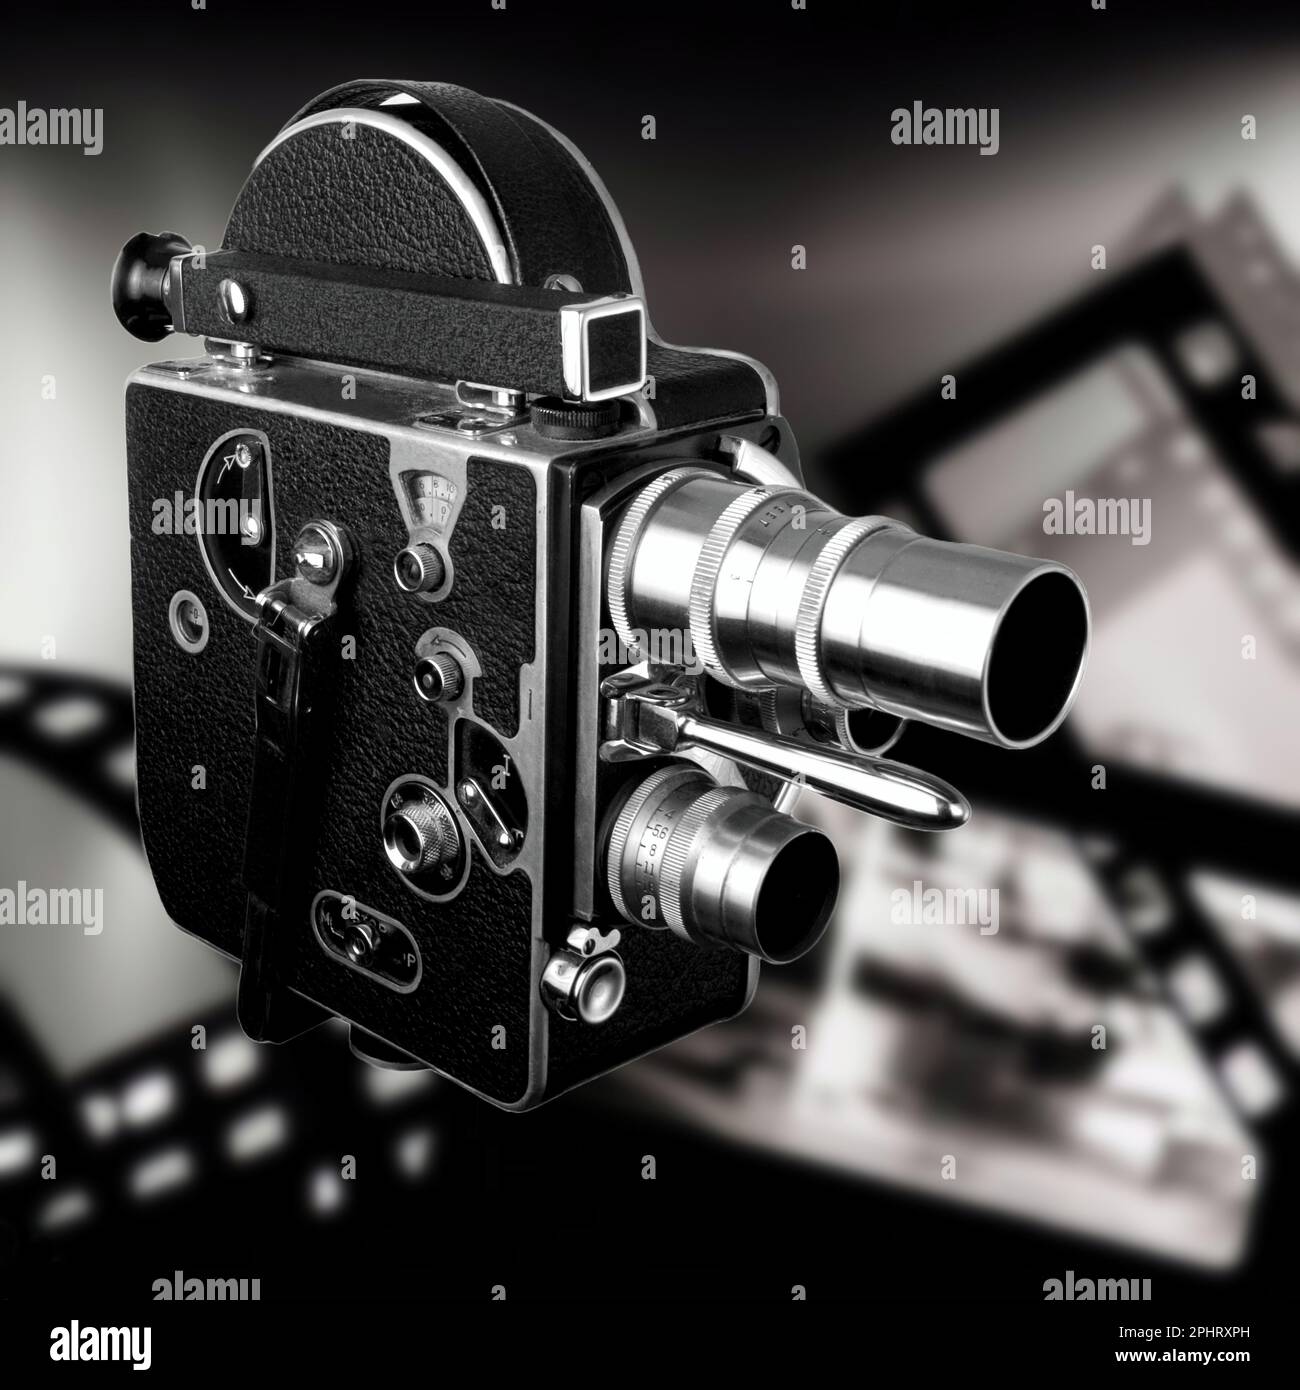 A Vintage Video Camera on the background of old films Stock Photo